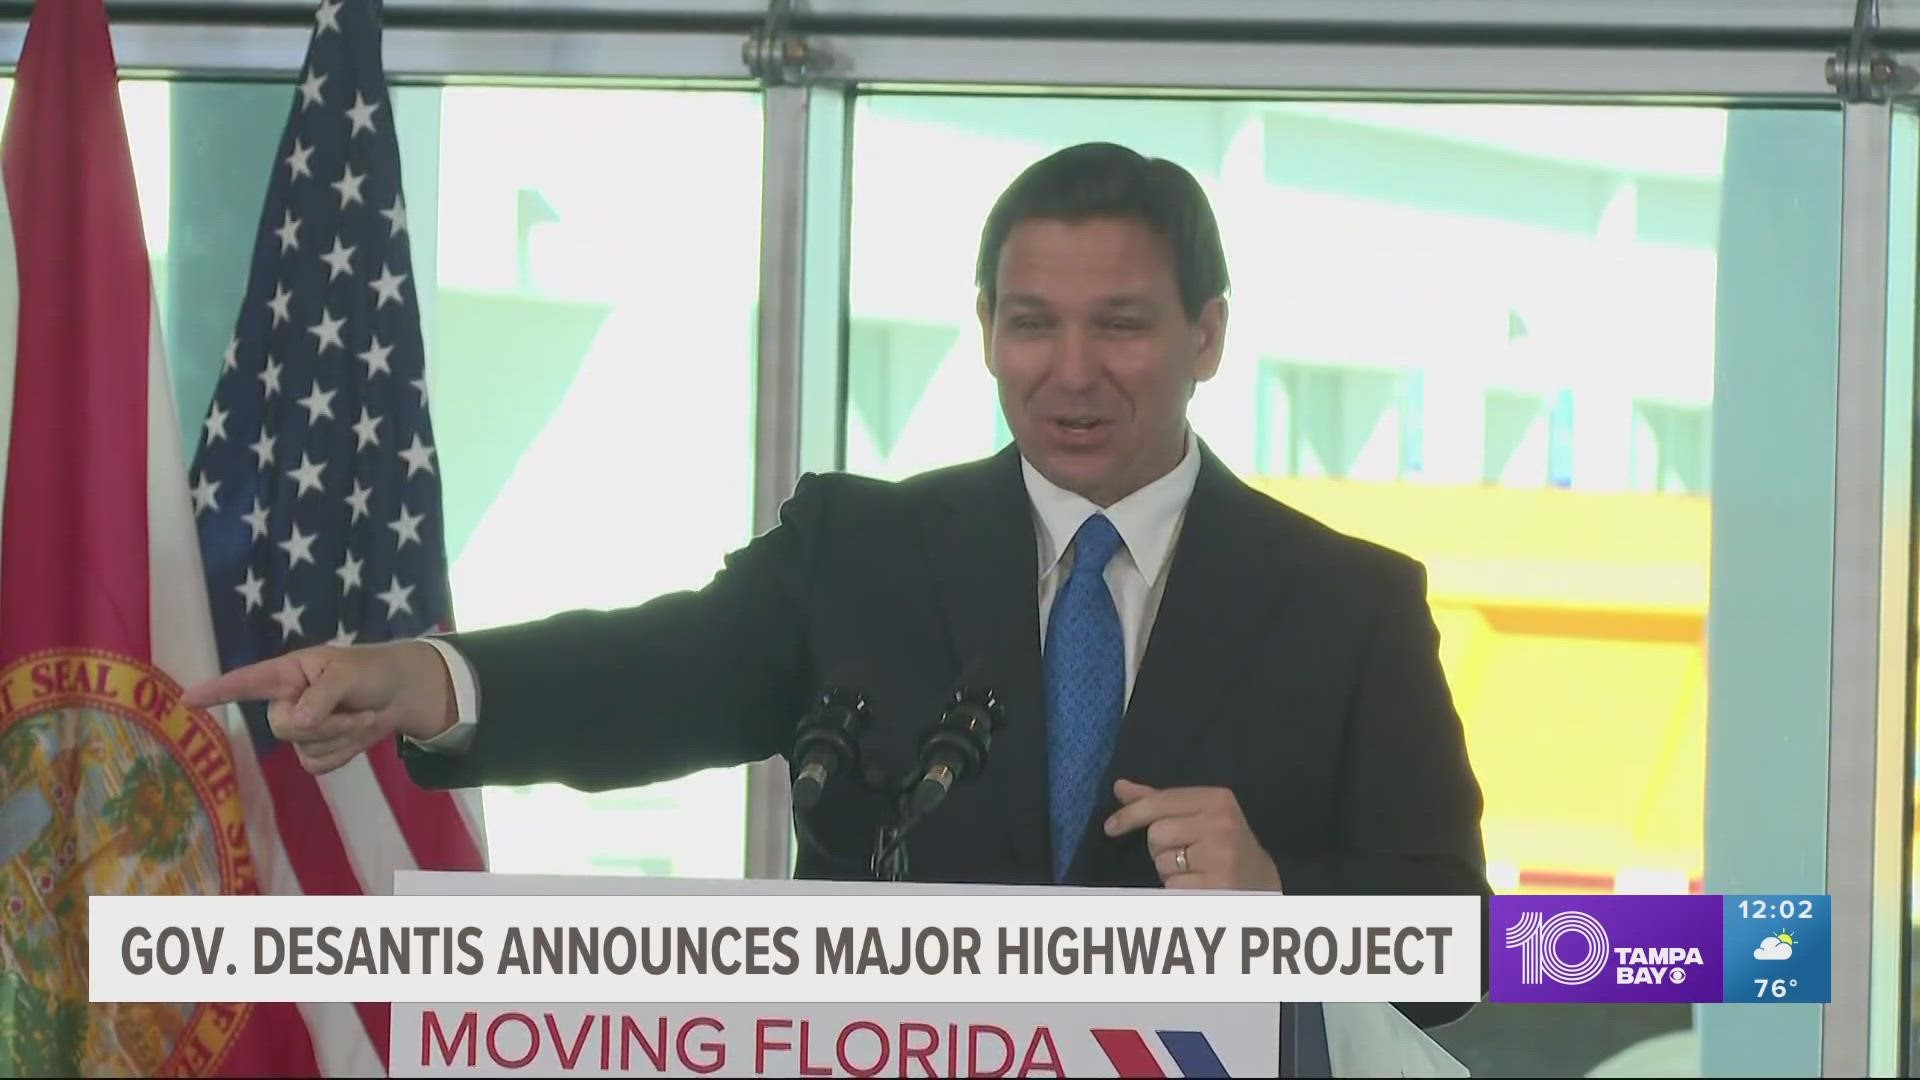 The funds would be distributed to 20 "major" road projects over the next four years, according to the governor.